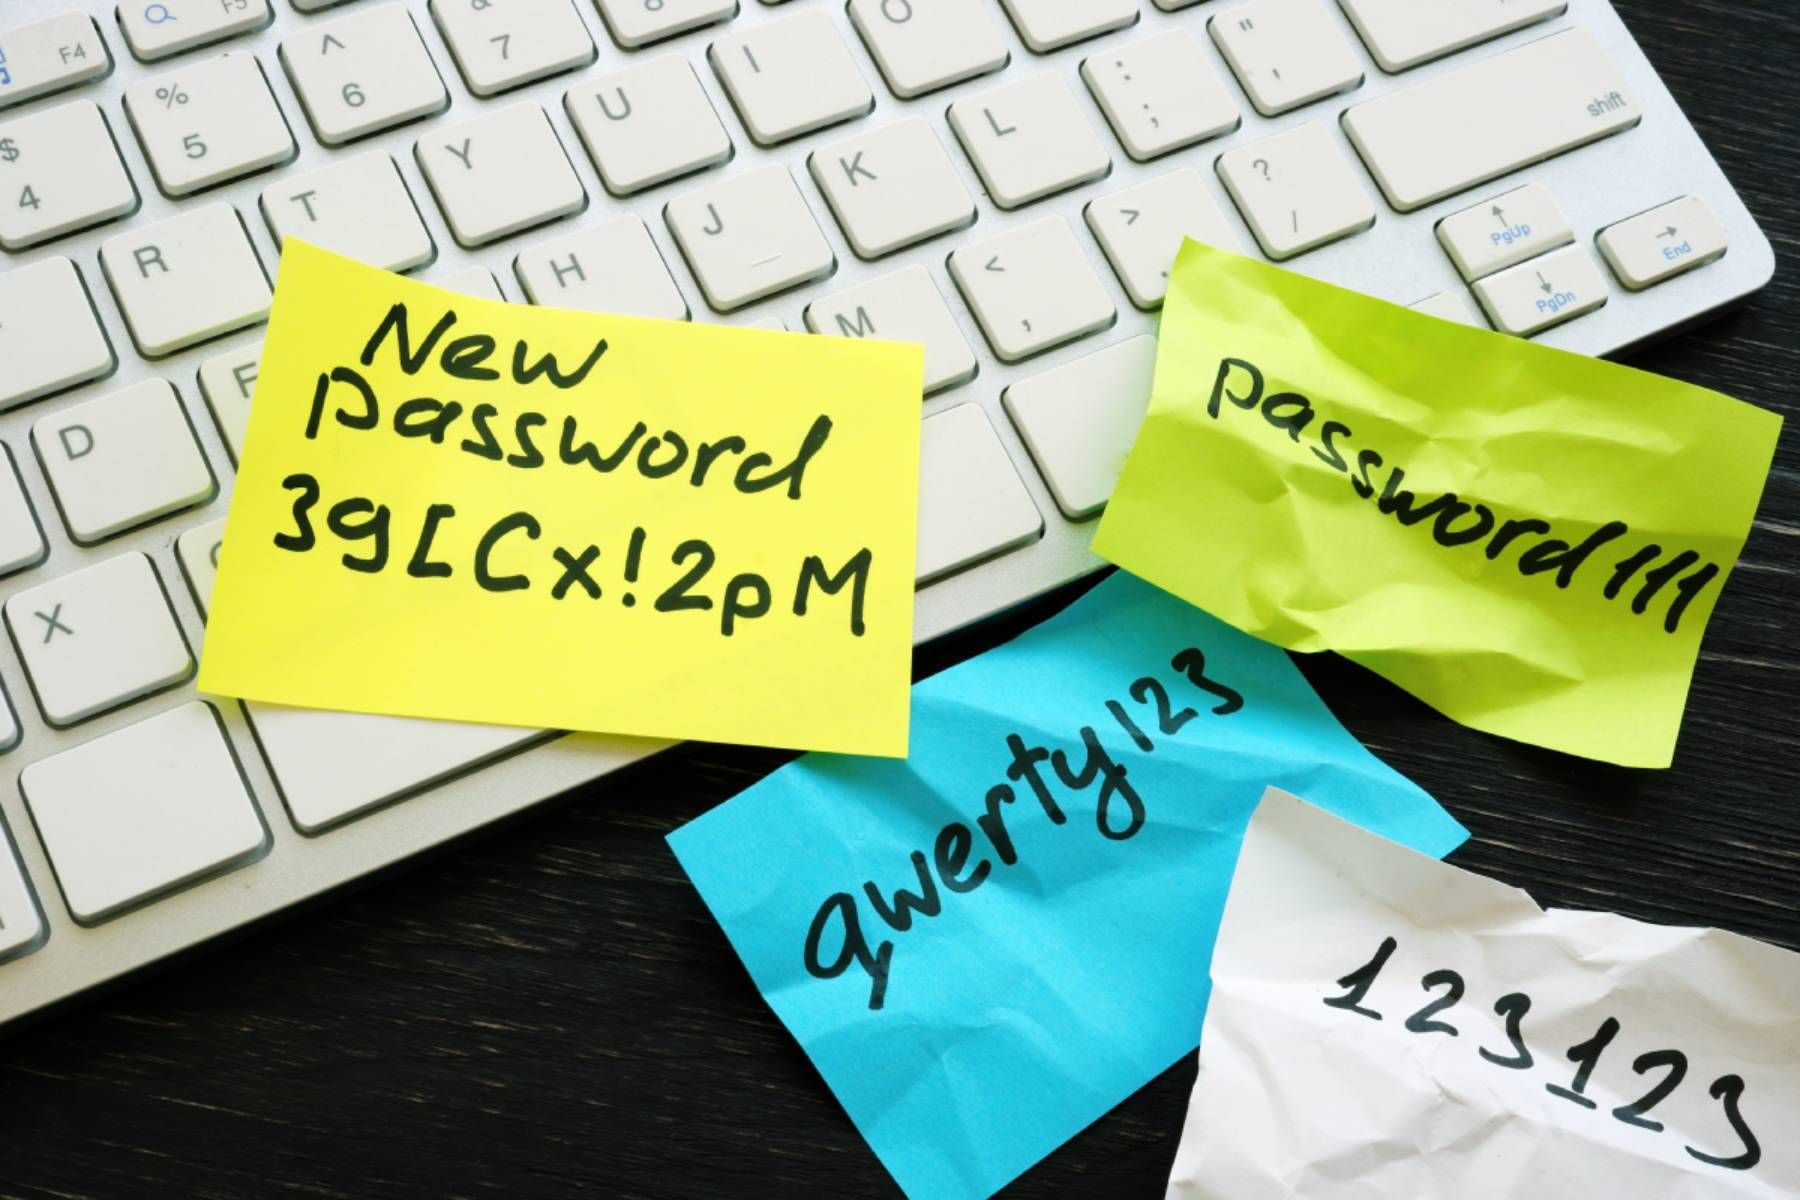 Near a white computer keyboard are several weak passwords written on sticky notes plus one with a new strong password.